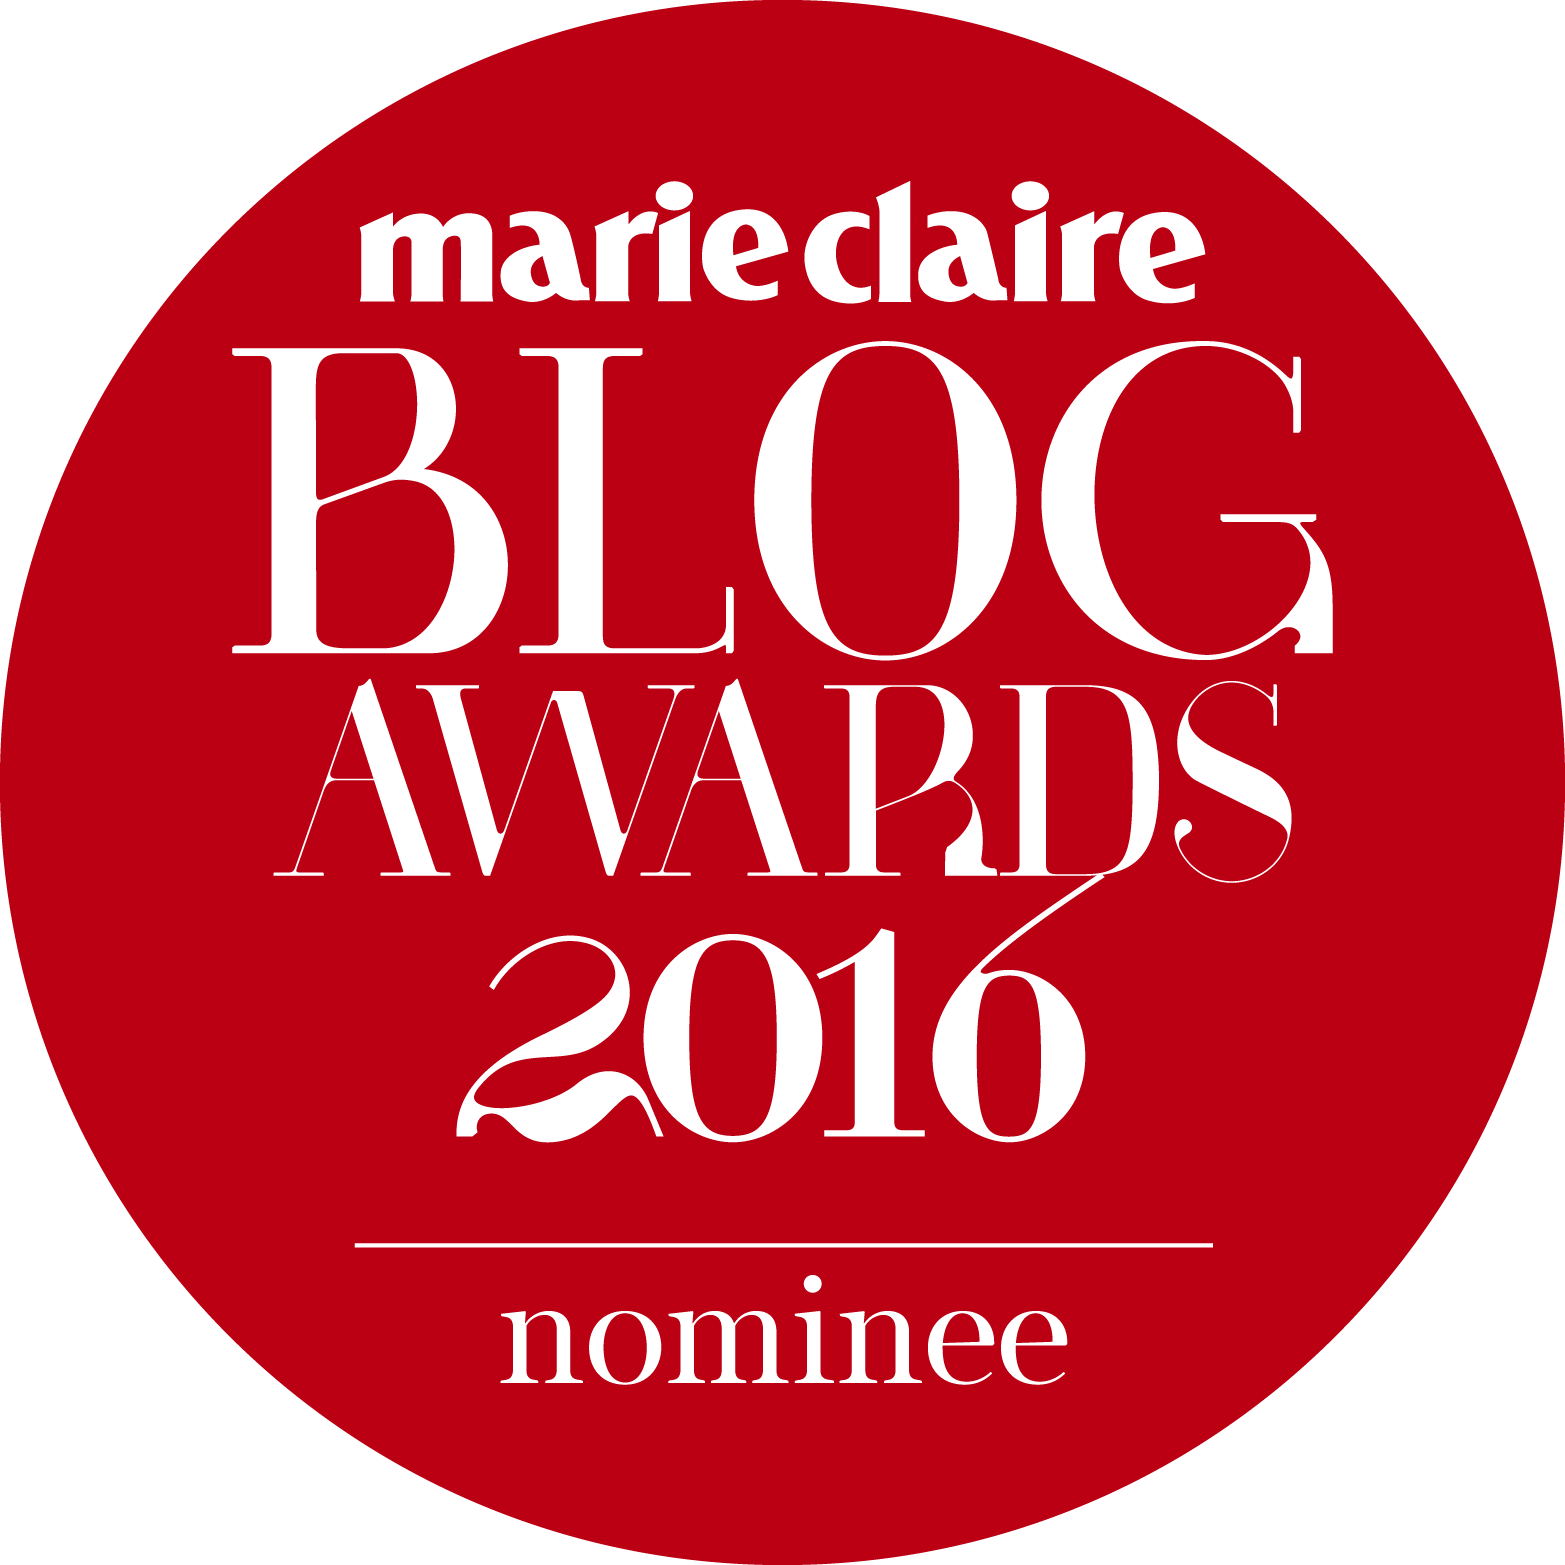 Marie Claire Blog Awards 2016